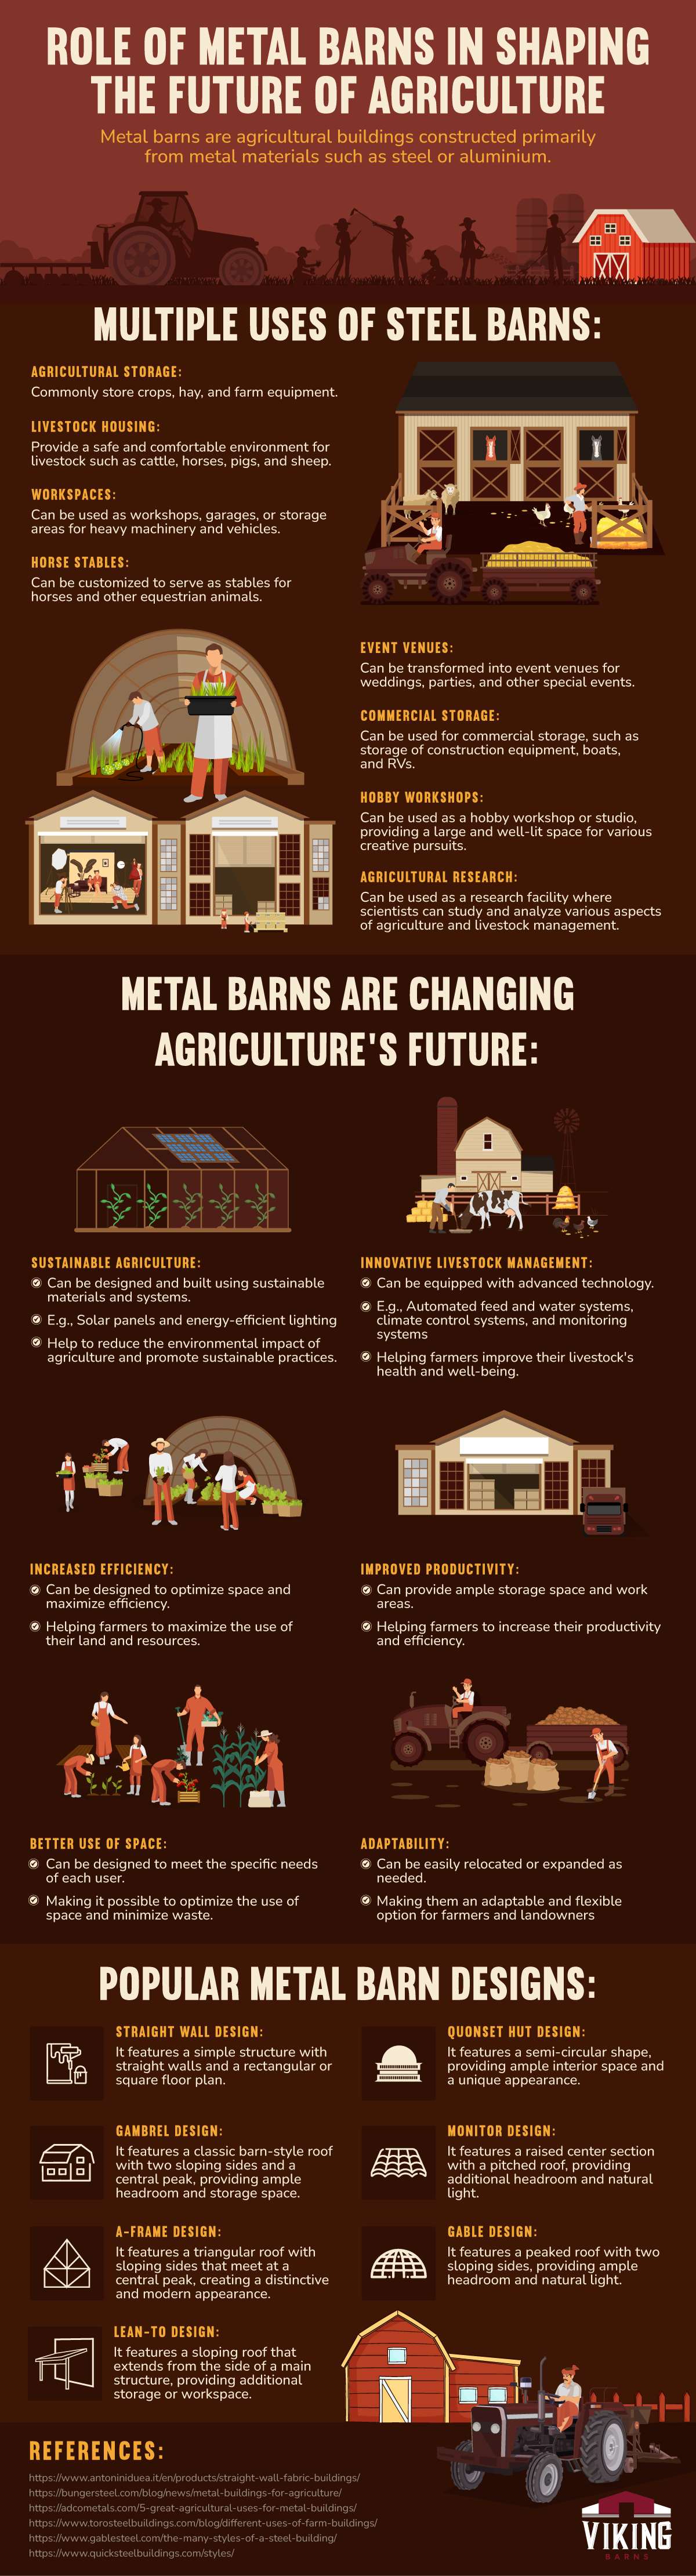 Role of Metal Barns in Shaping The Future of Agriculture